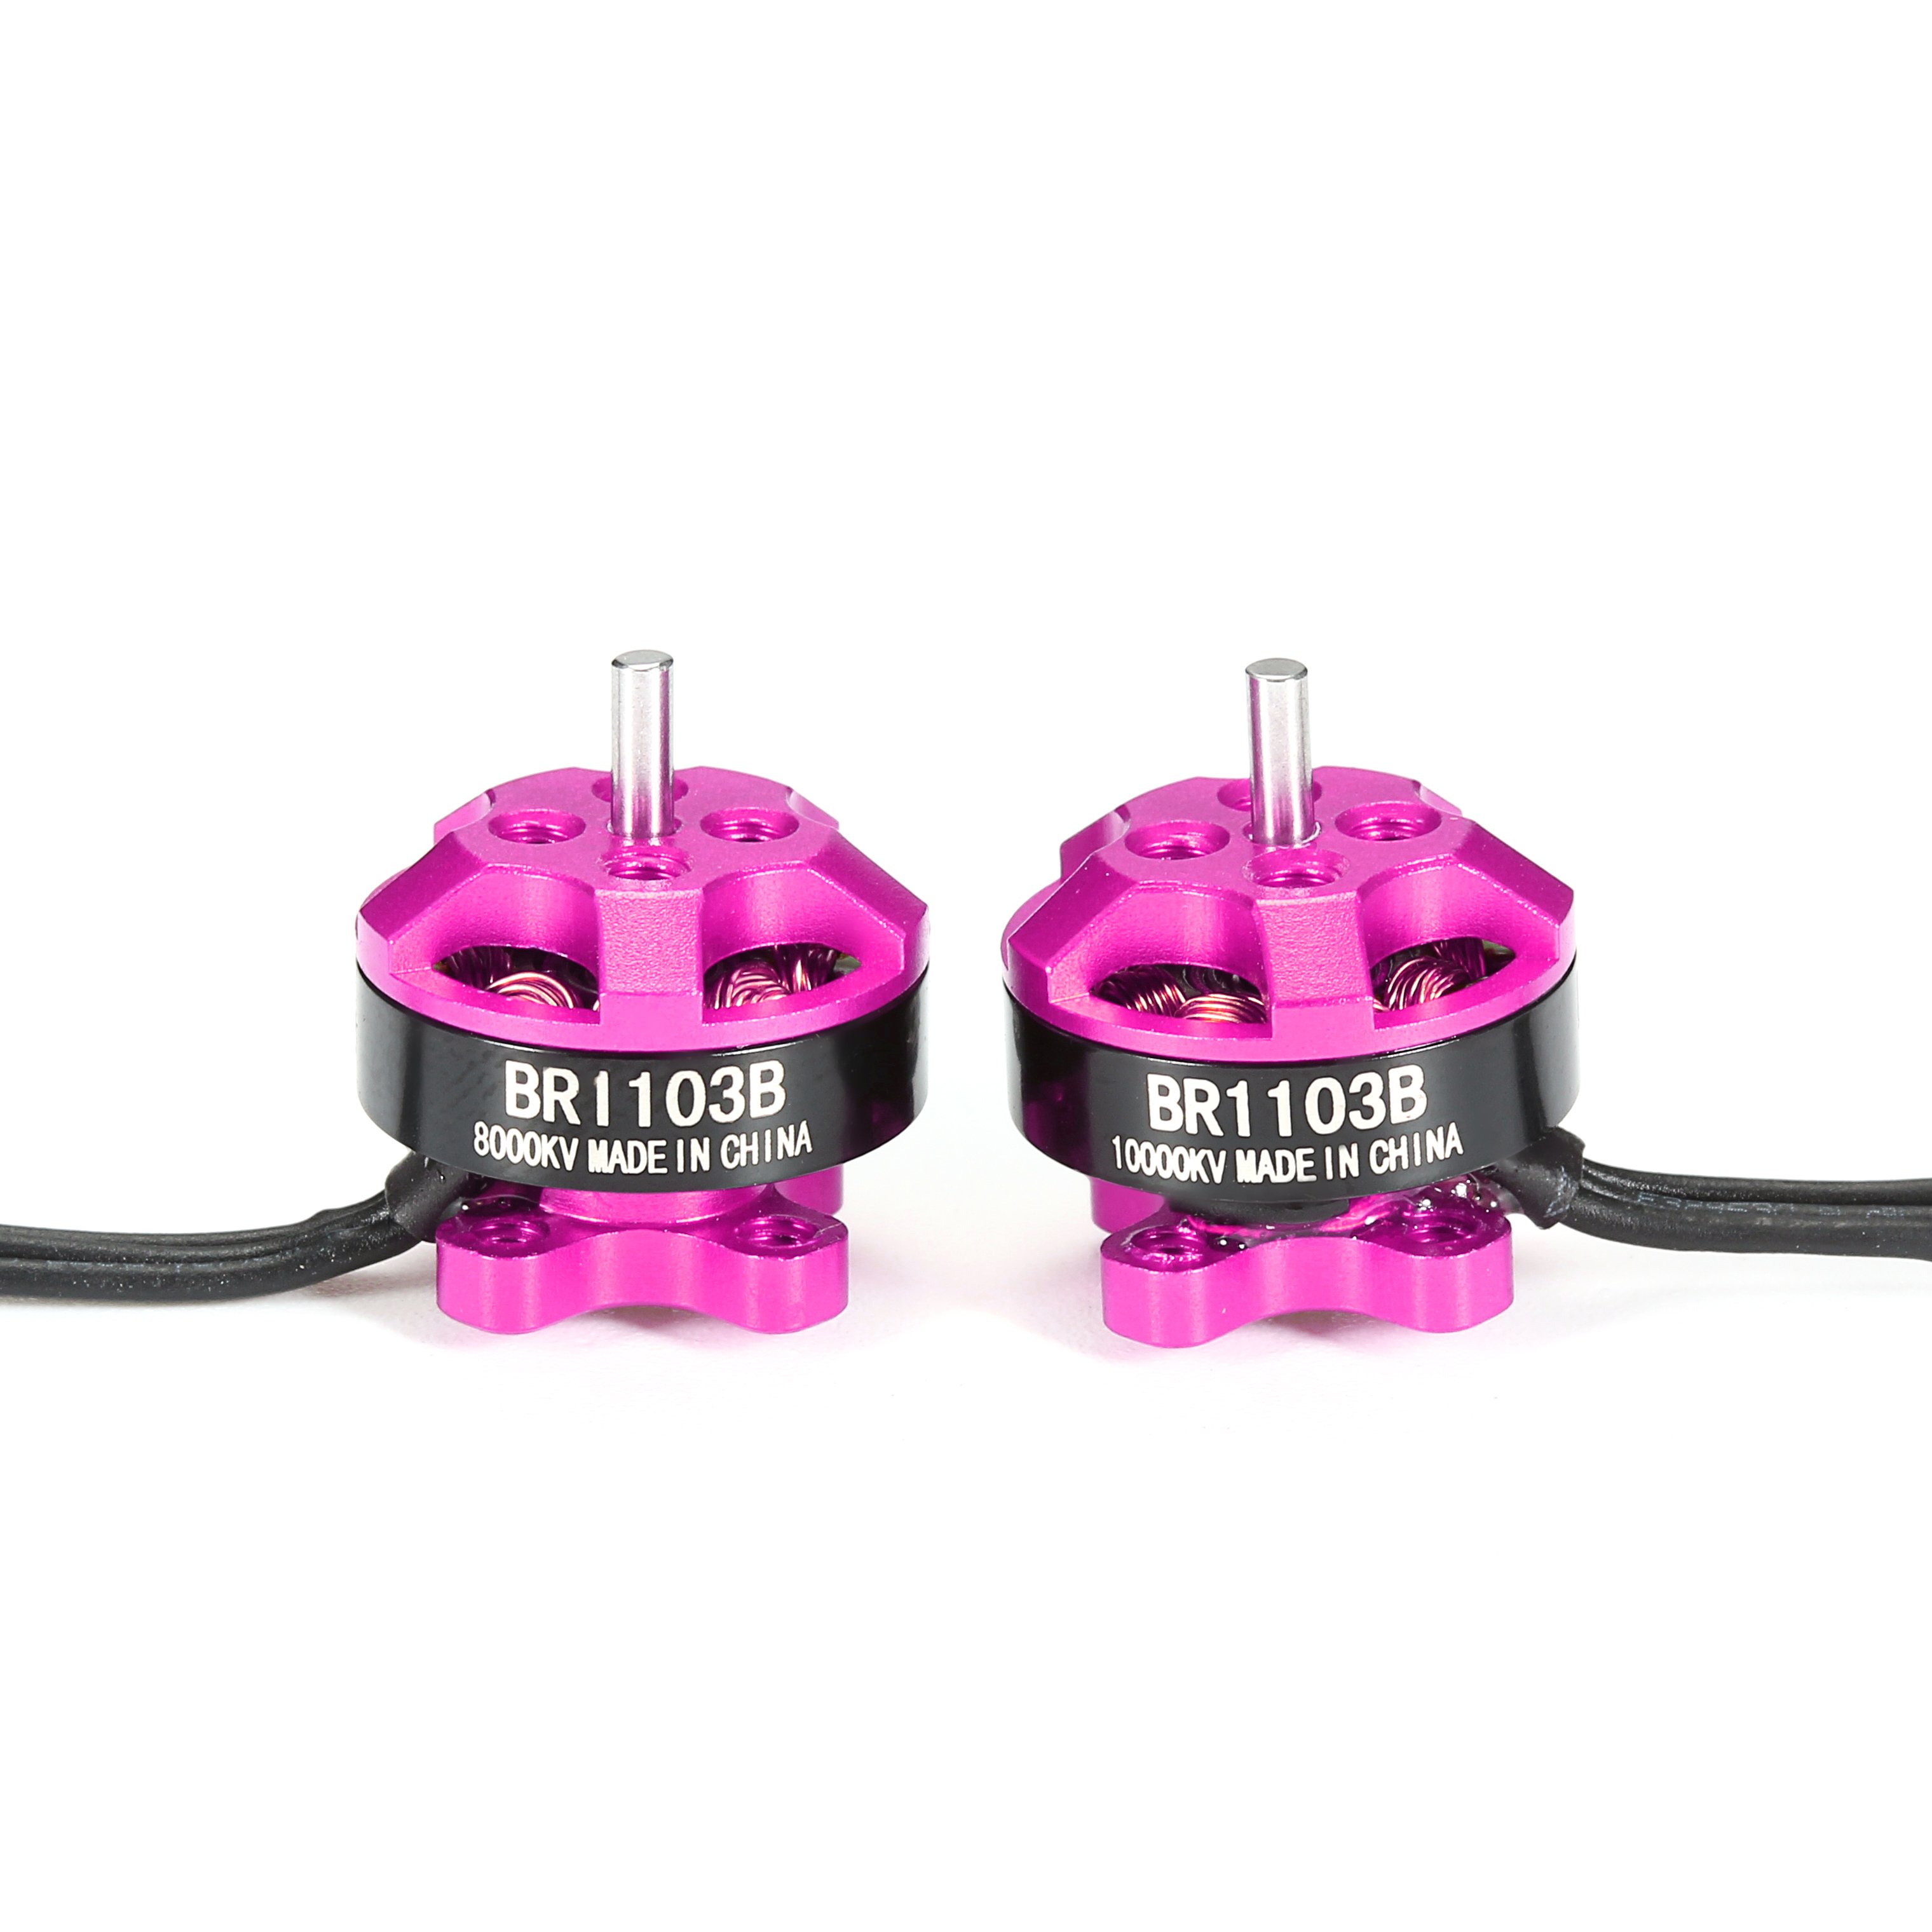 Brushless Motor Racerstar BR1103B Racing Edition Pink 8000kv 1-3s for RC Drone